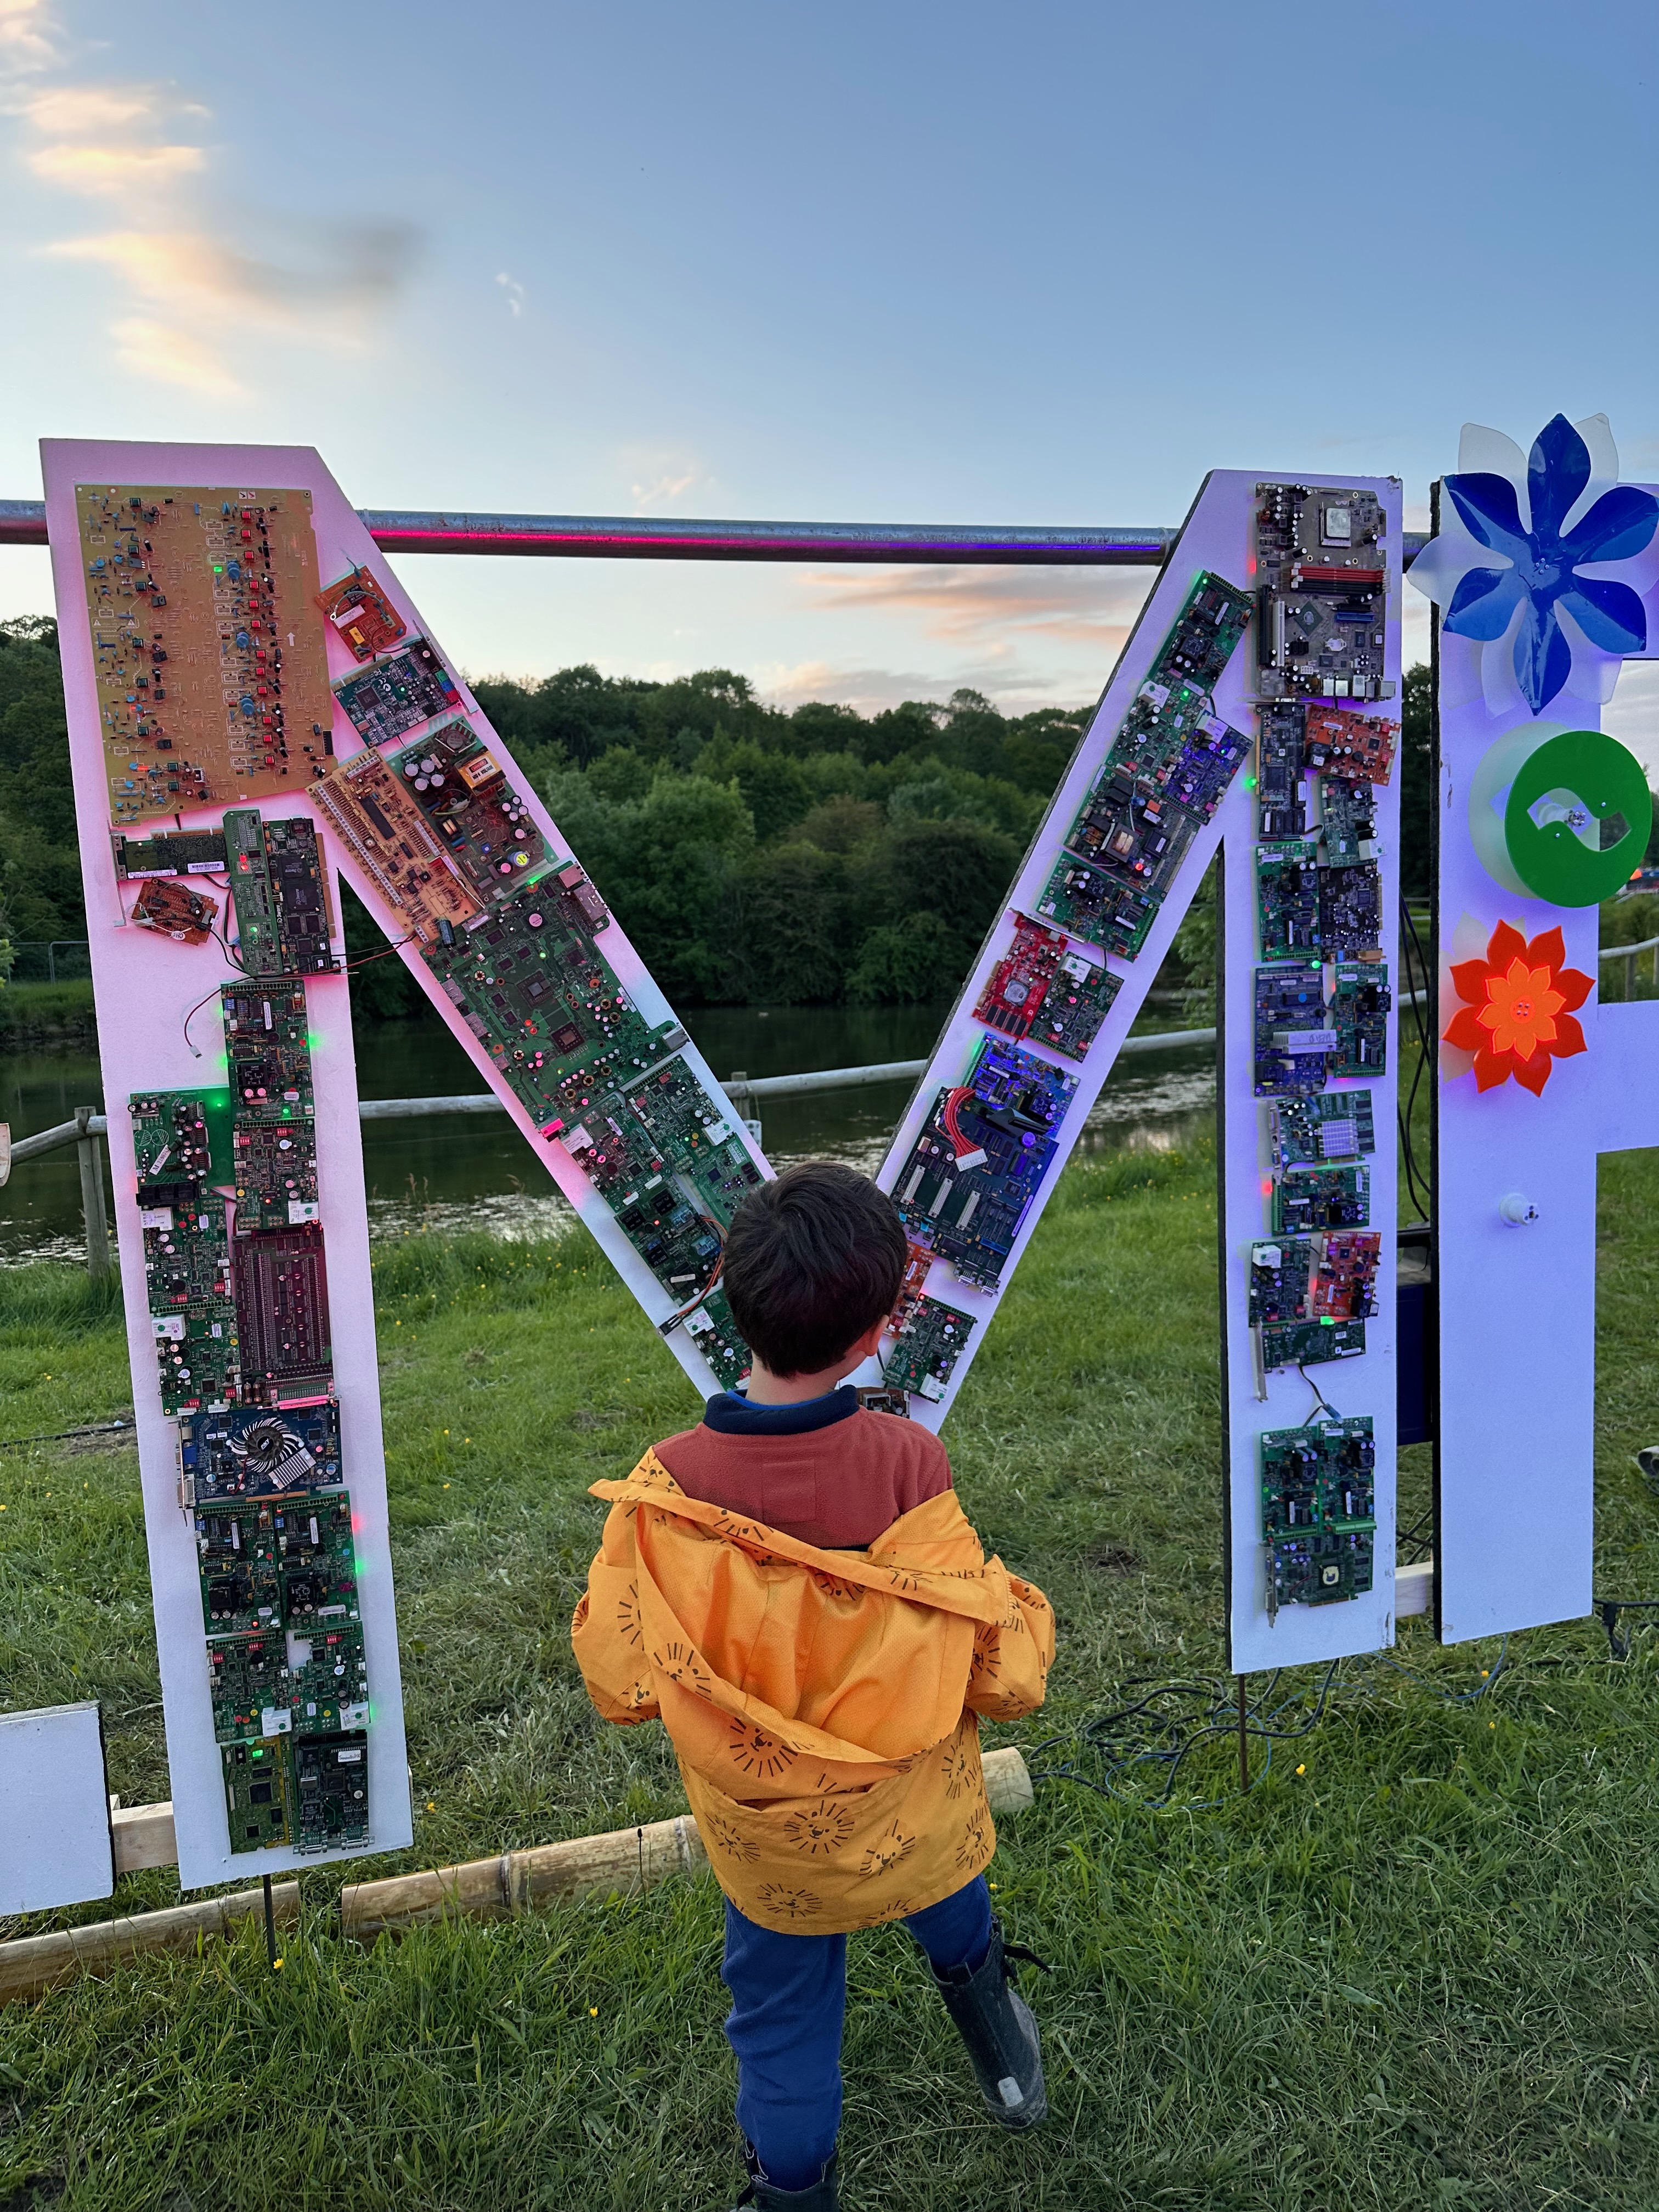 A young boy stands in front of the letter 'M' which is propped up in a field. The 'M' is about twice his height. The letter is white but filled with old circuit boards.